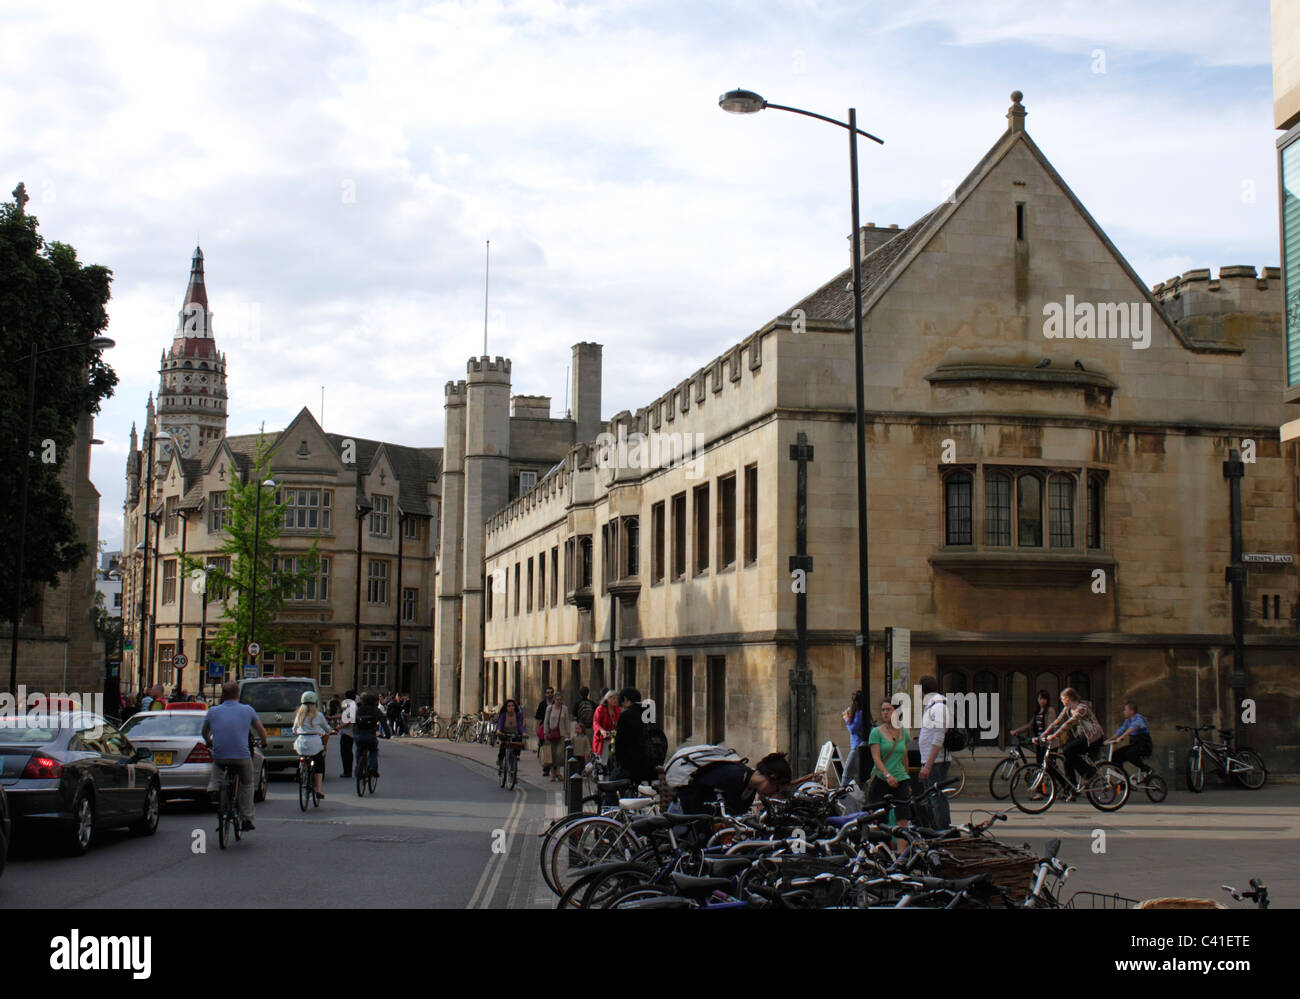 View along St Andrews Street Cambridge Christ's College on right Stock Photo